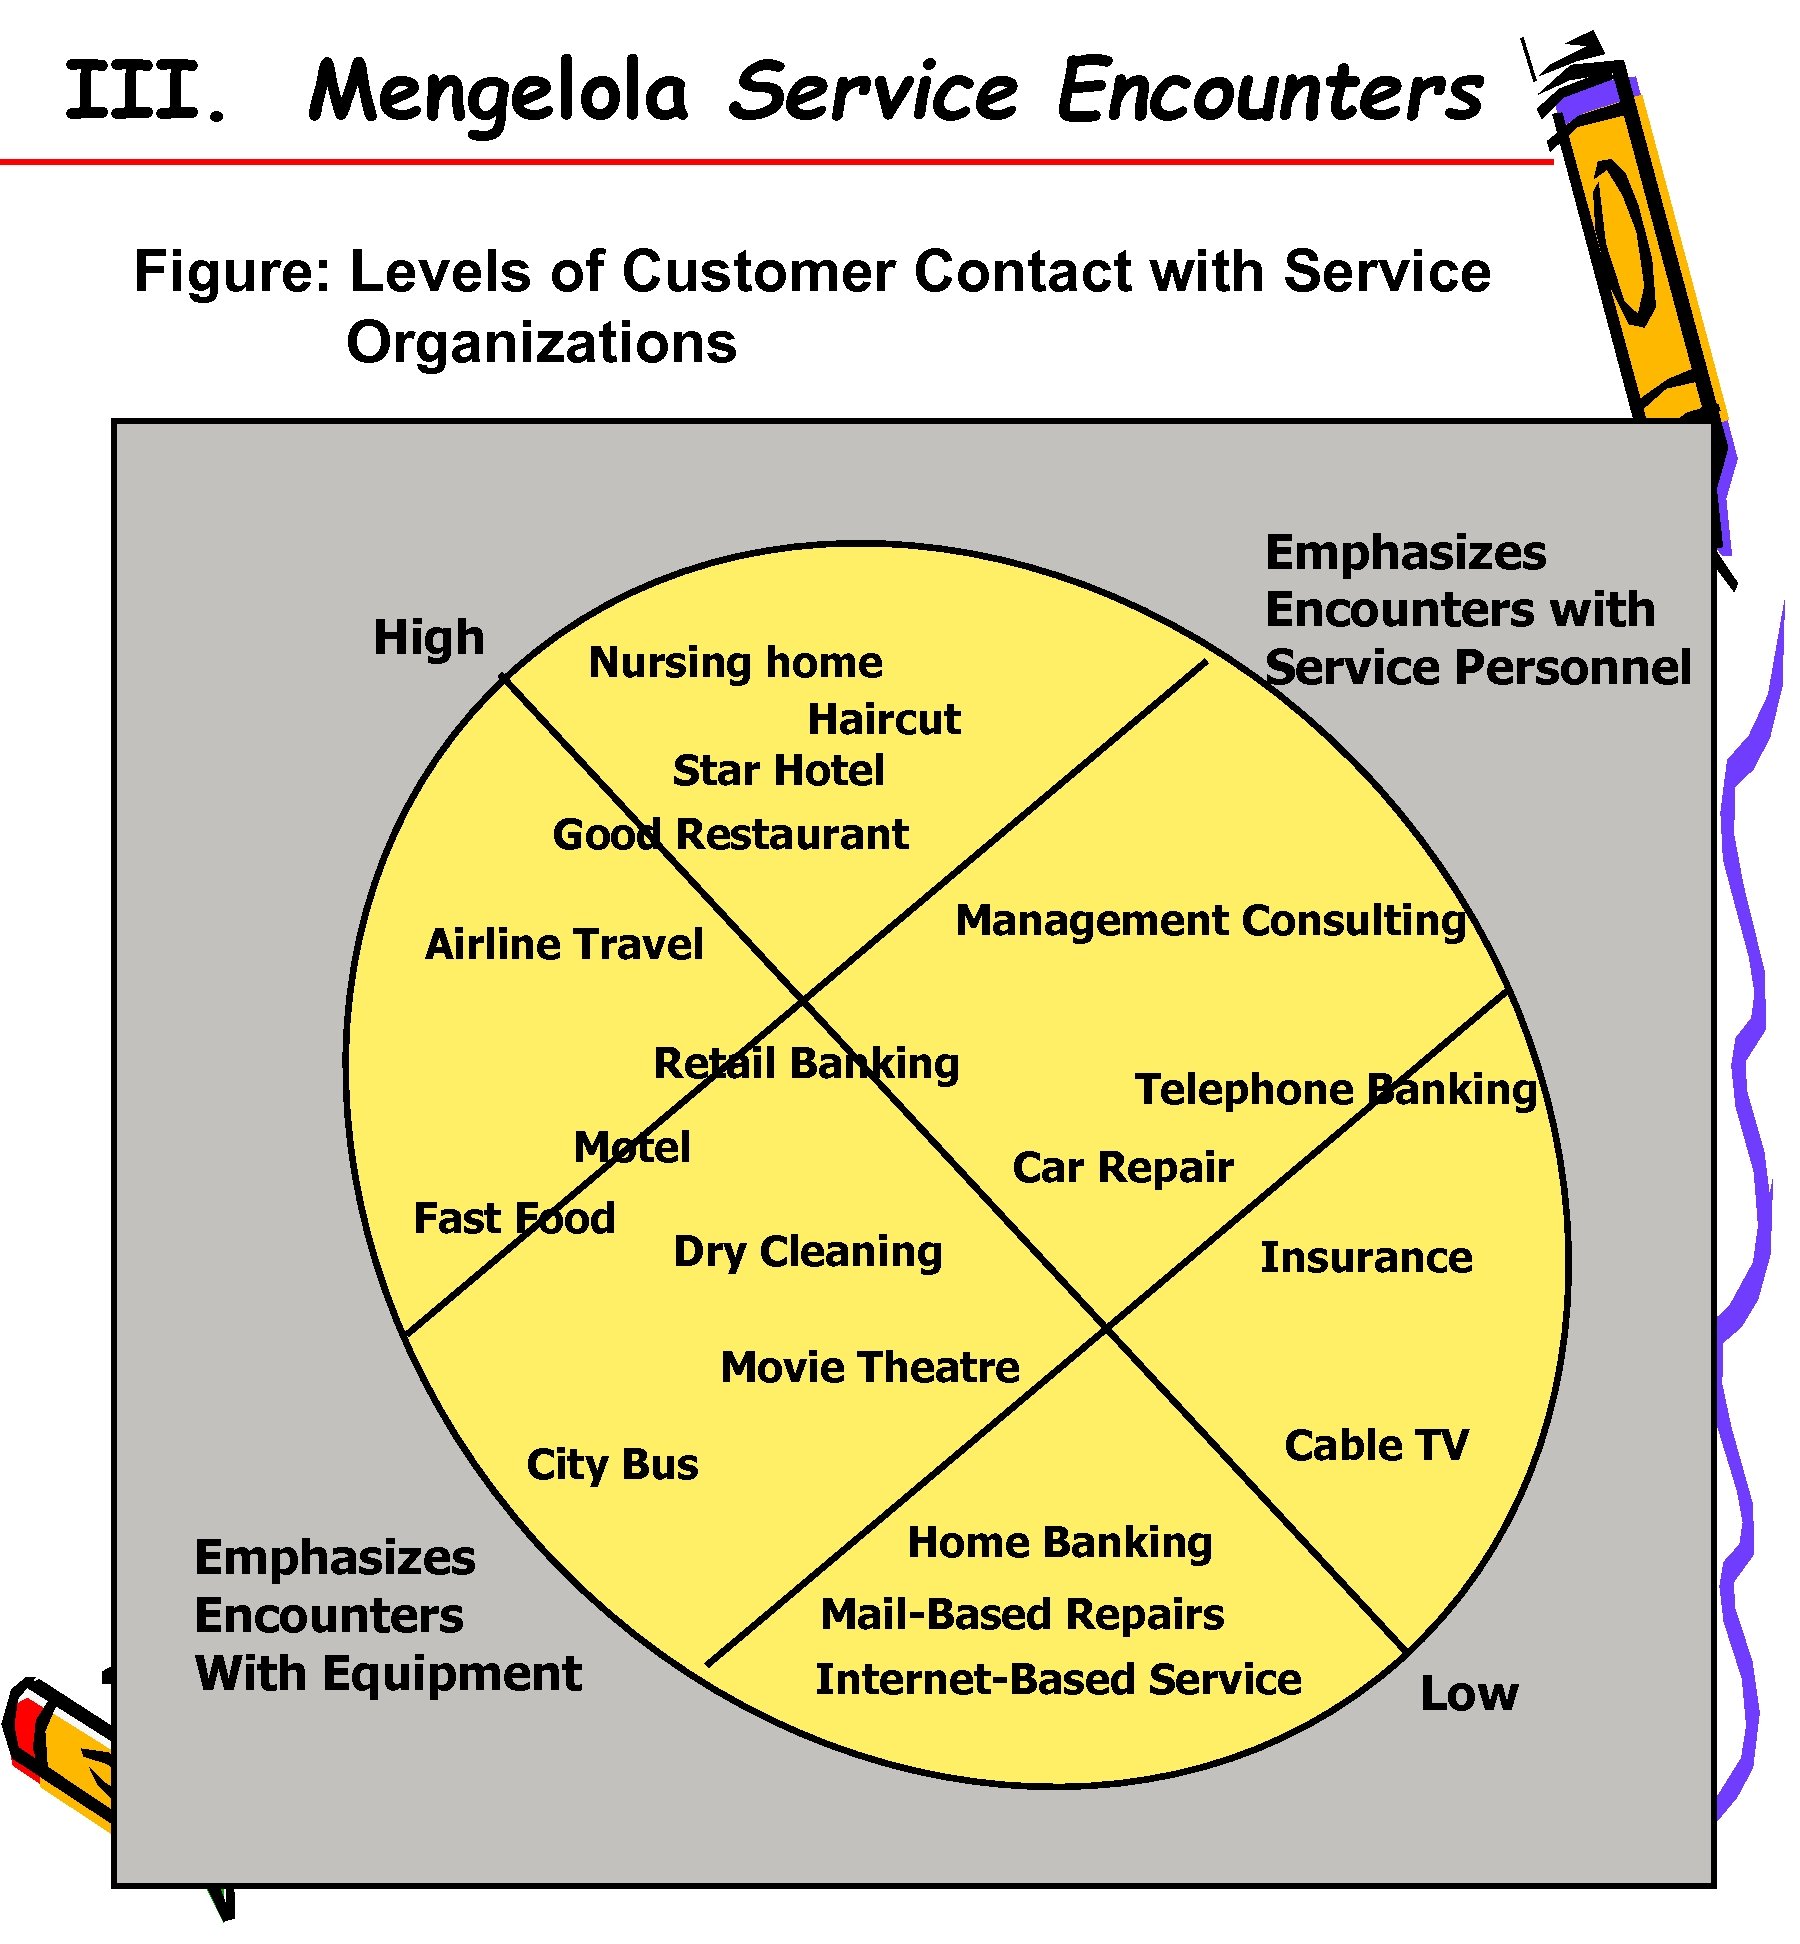 III. Mengelola Service Encounters Figure: Levels of Customer Contact with Service Organizations High Emphasizes